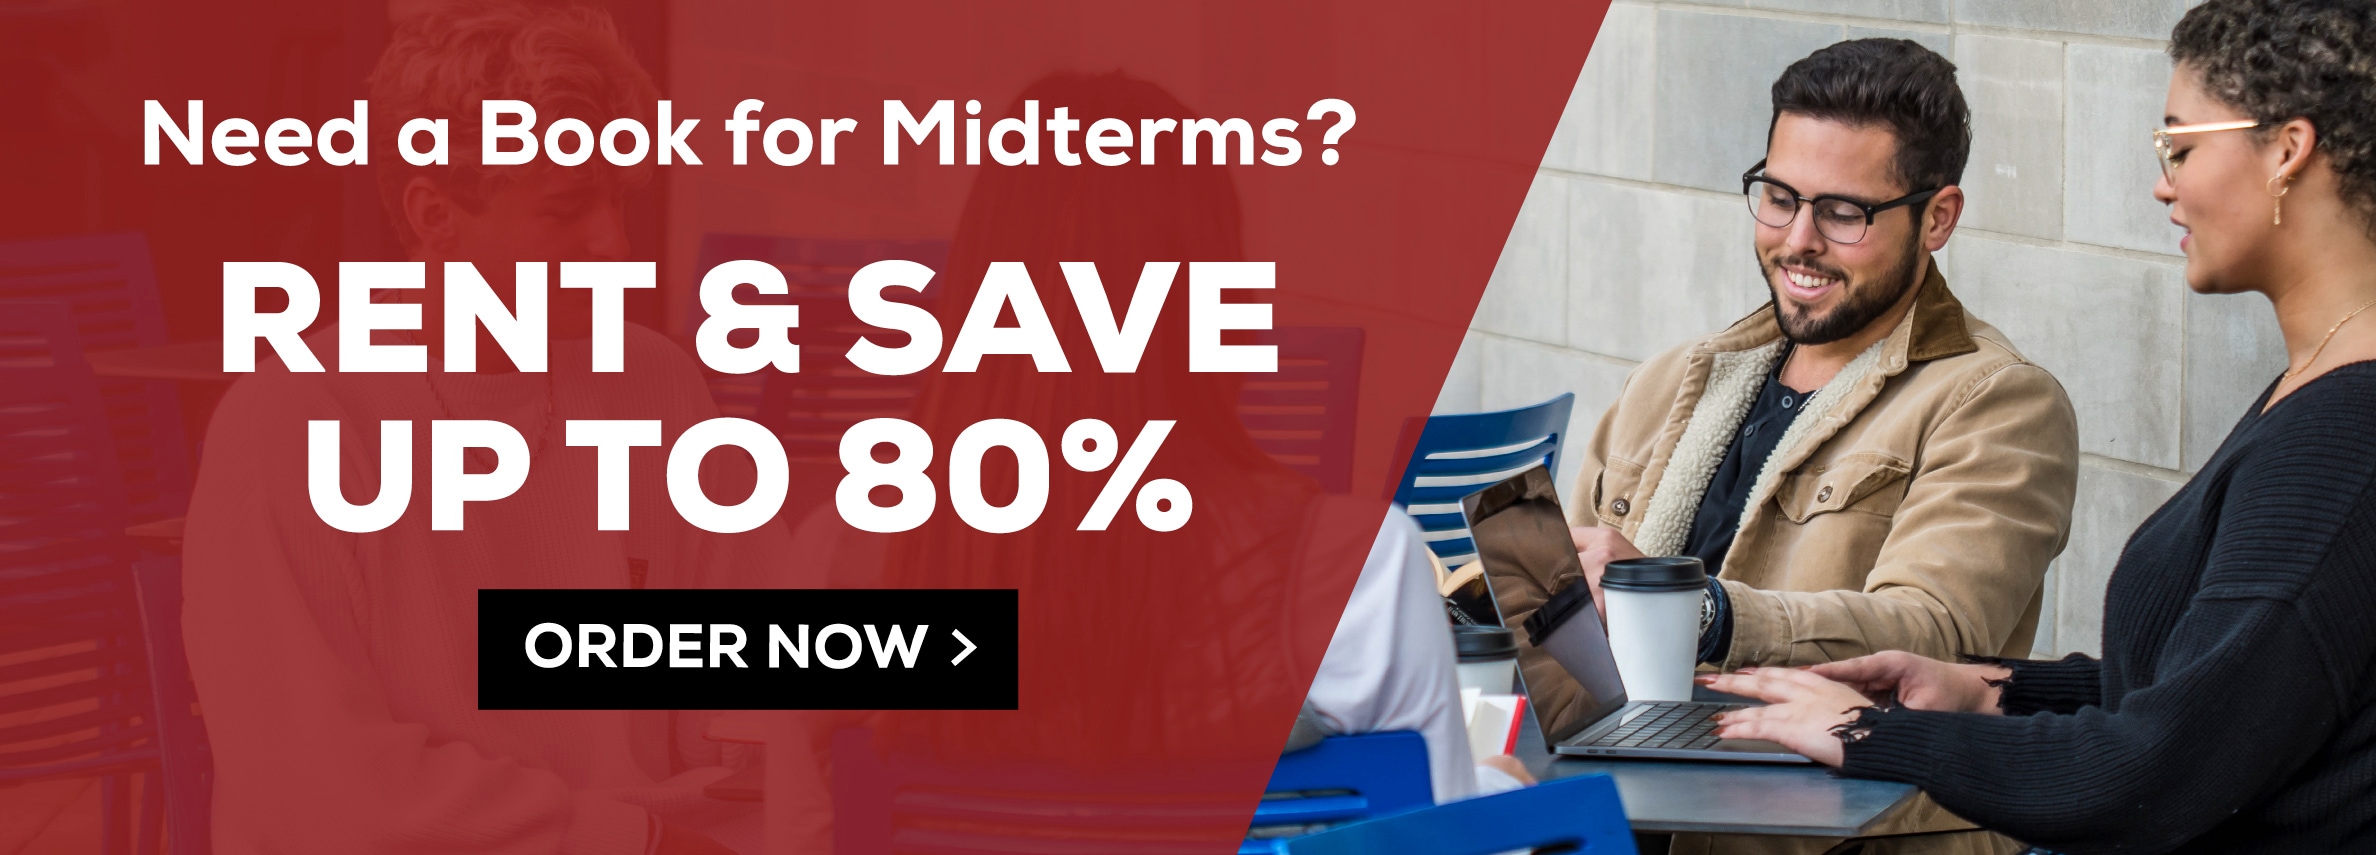 Need a Book for Midterms? Rent & Save up to 80% Order Now>